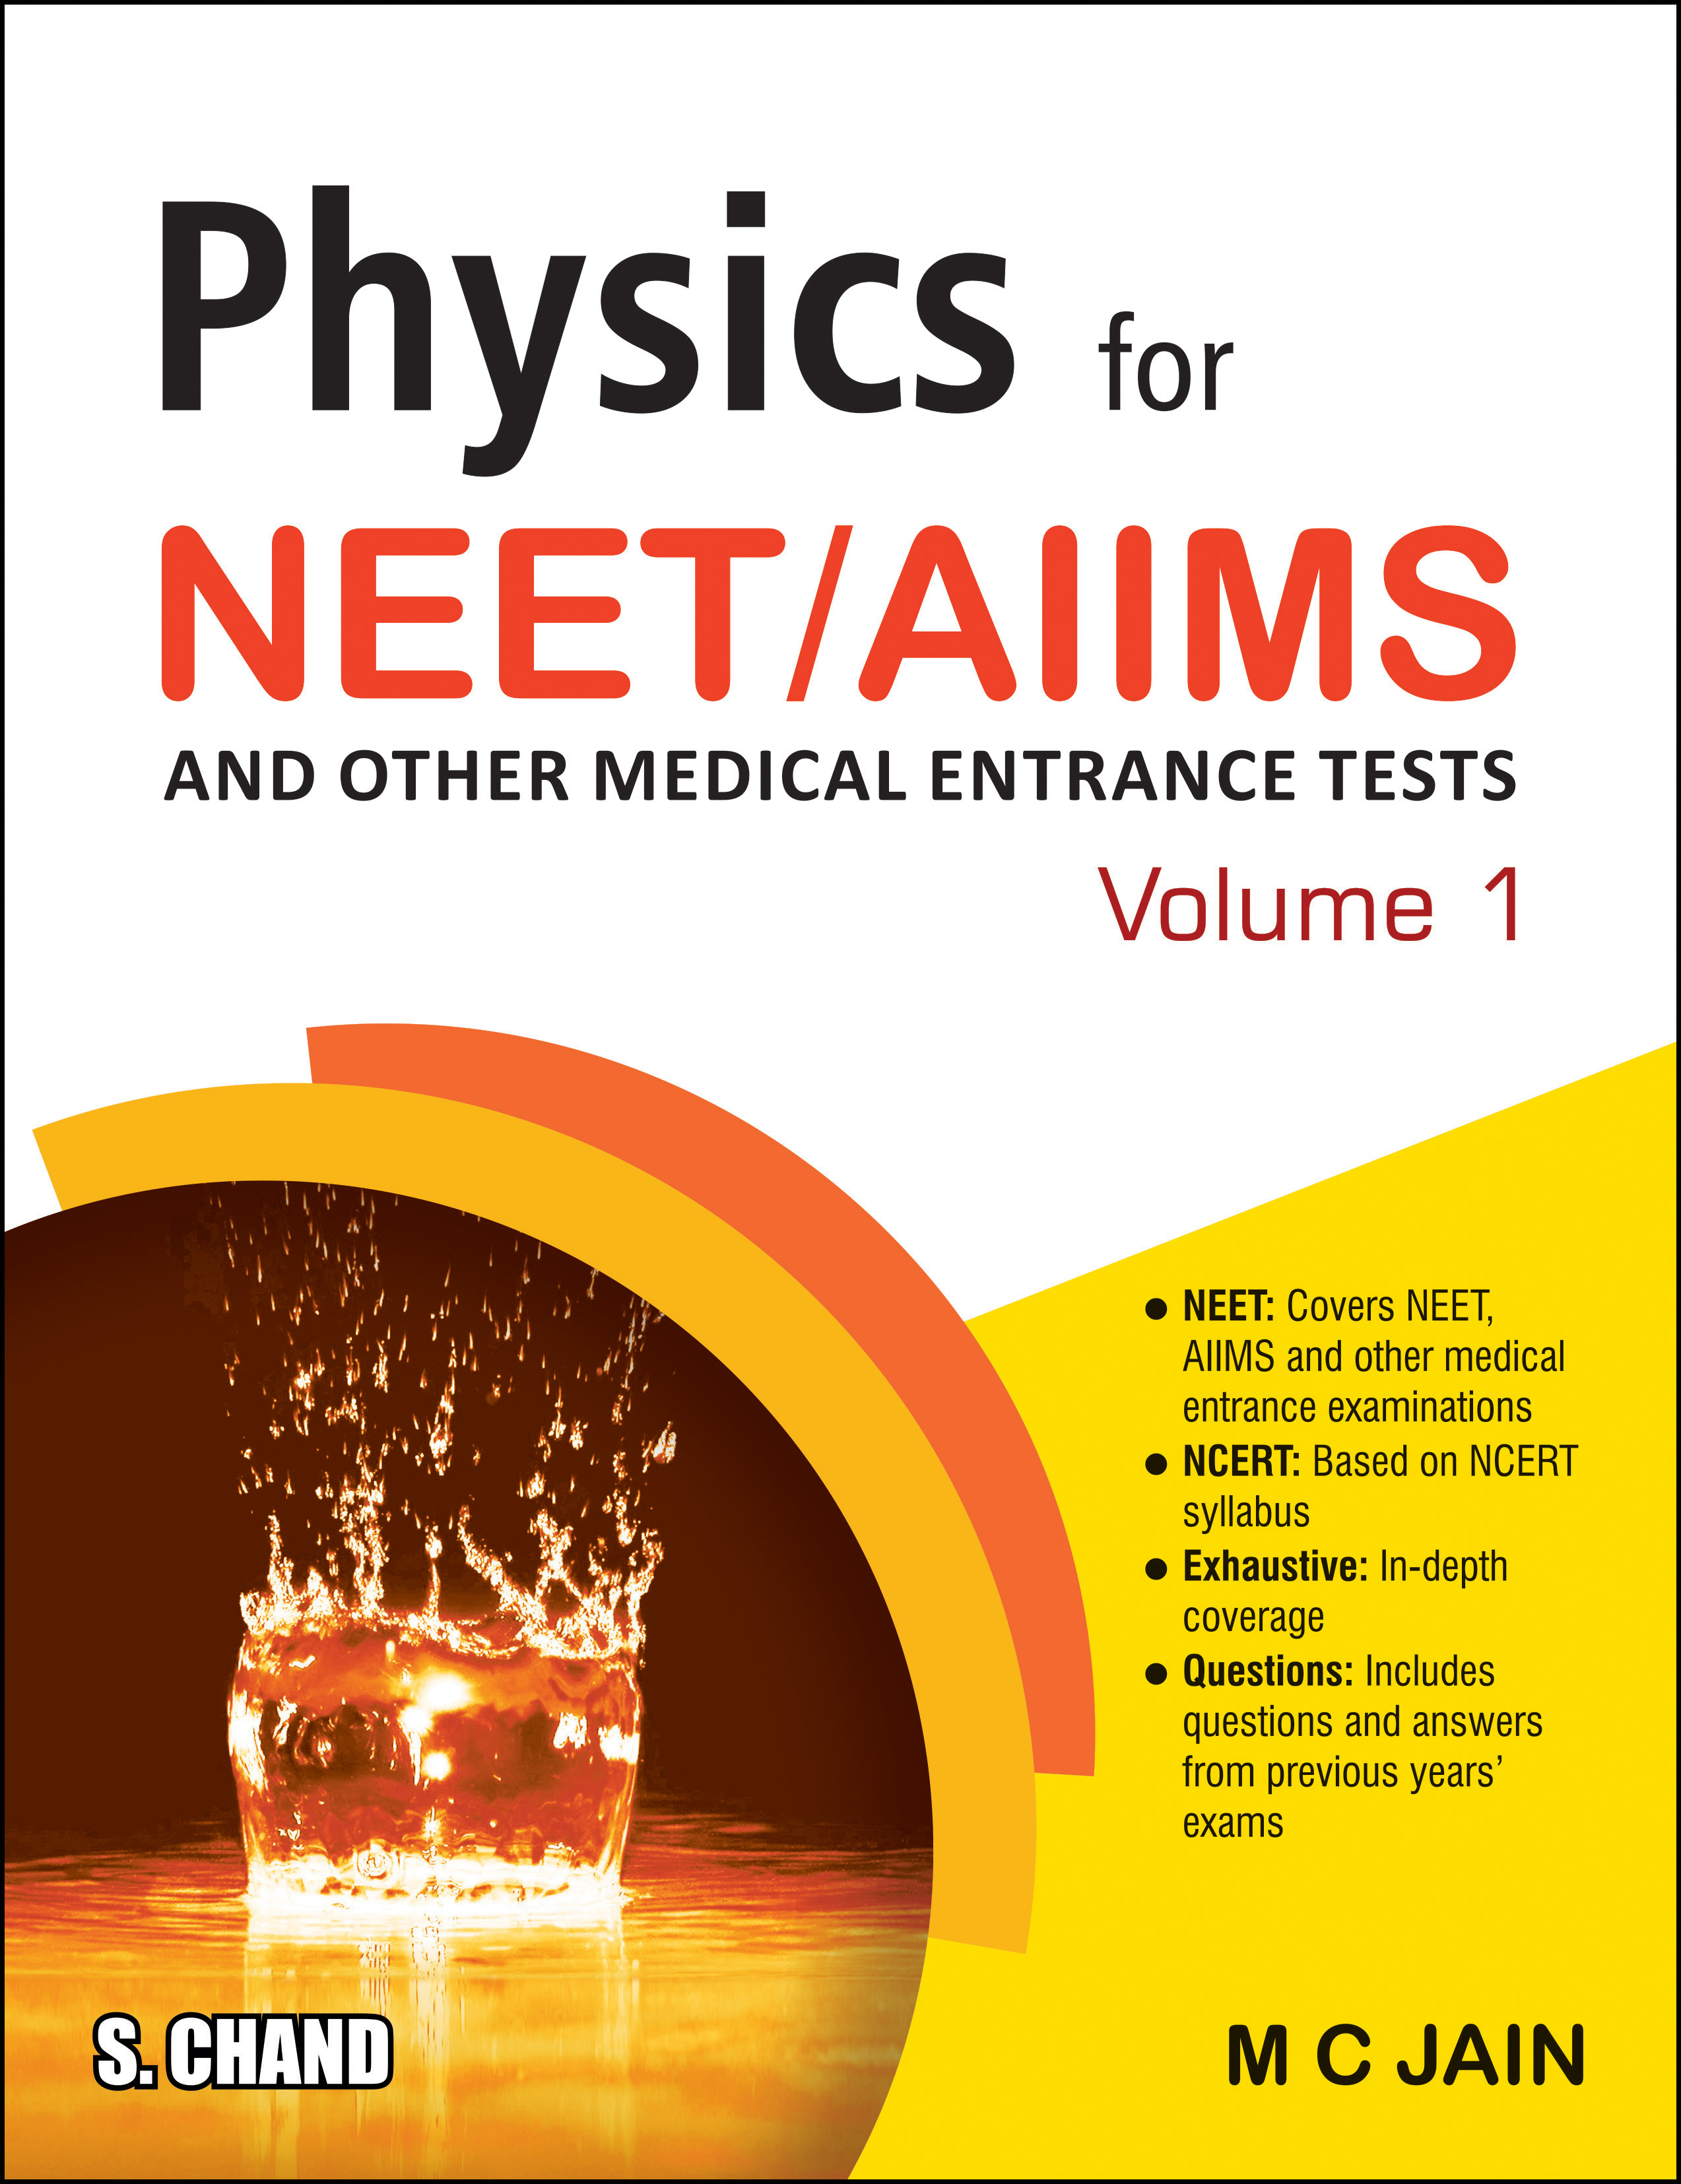 pearson objective physics for neet pdf download